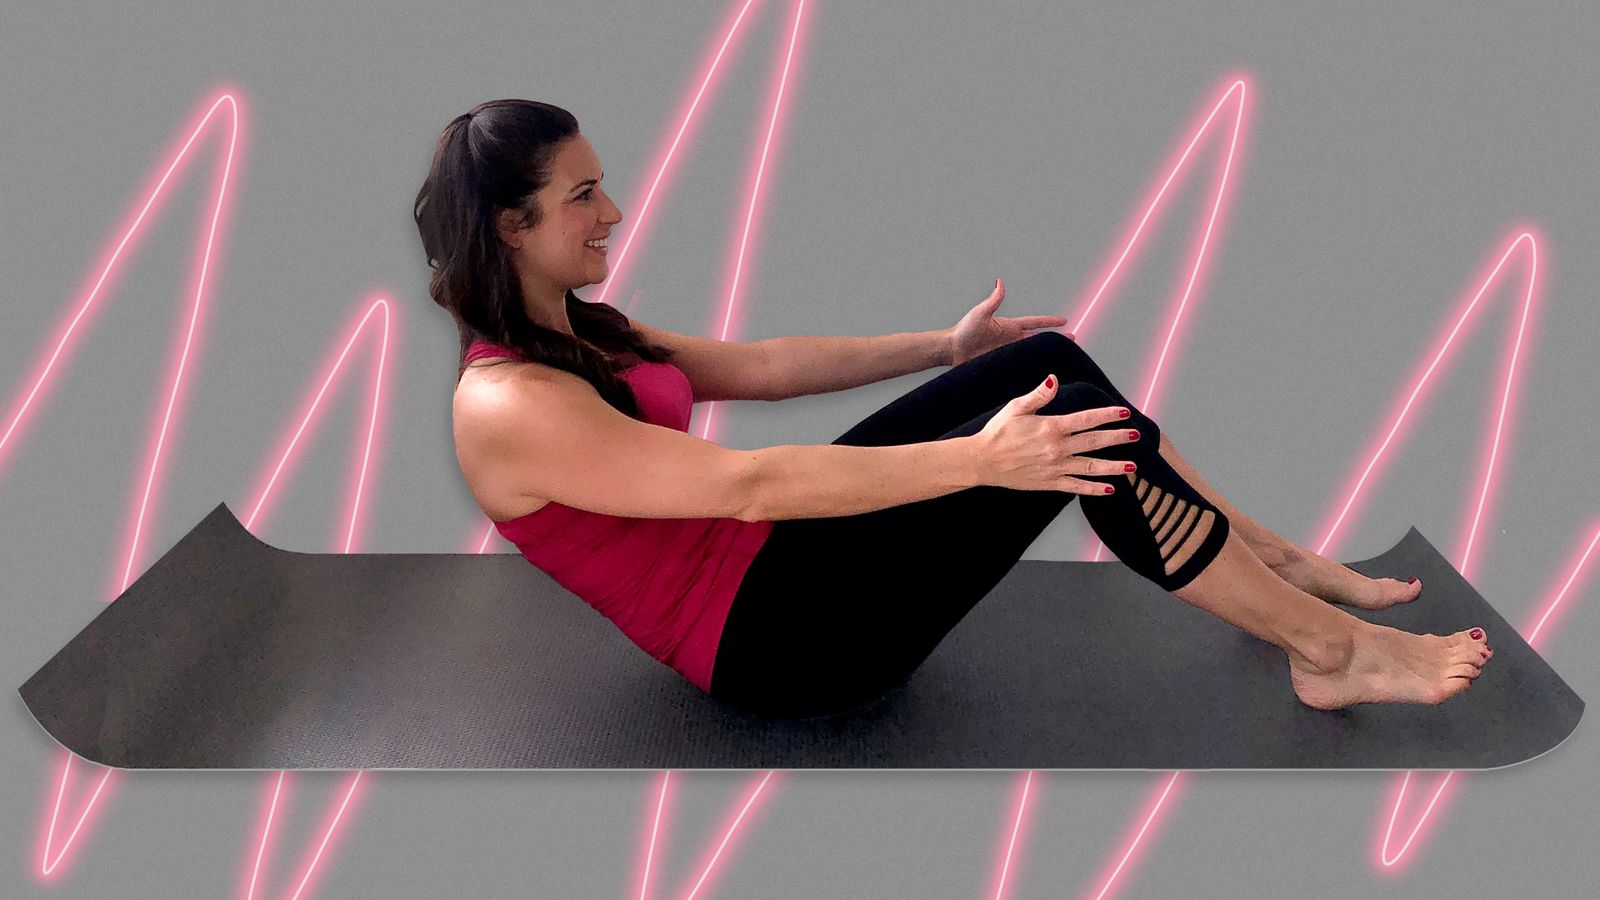 Ankle Pain Relief Stretches - 5 Minute Real Time Routine 